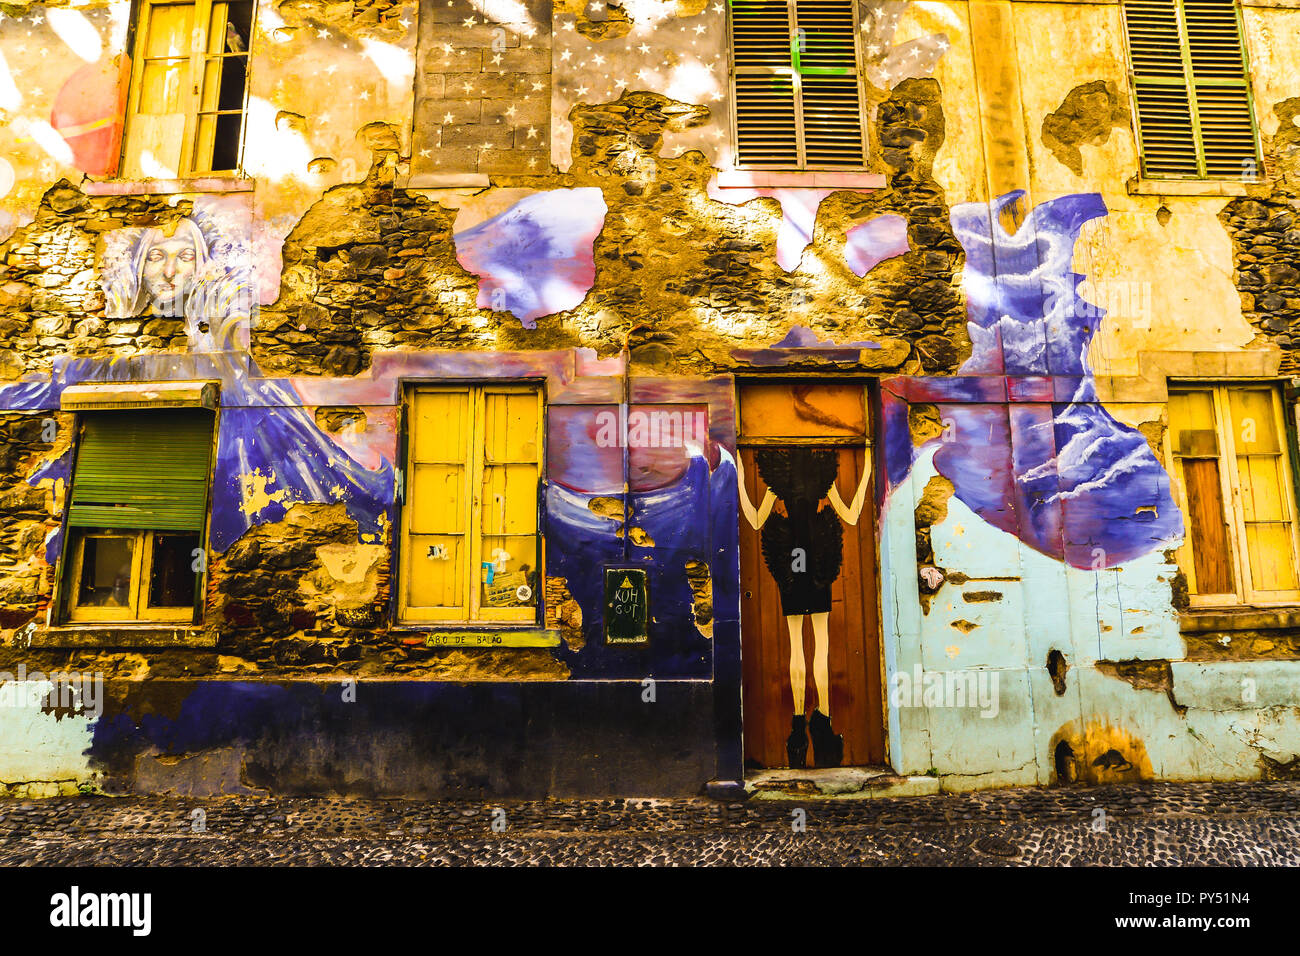 A brightly colorful but decaying wall in Funchal - Maderia, Portugal Stock Photo